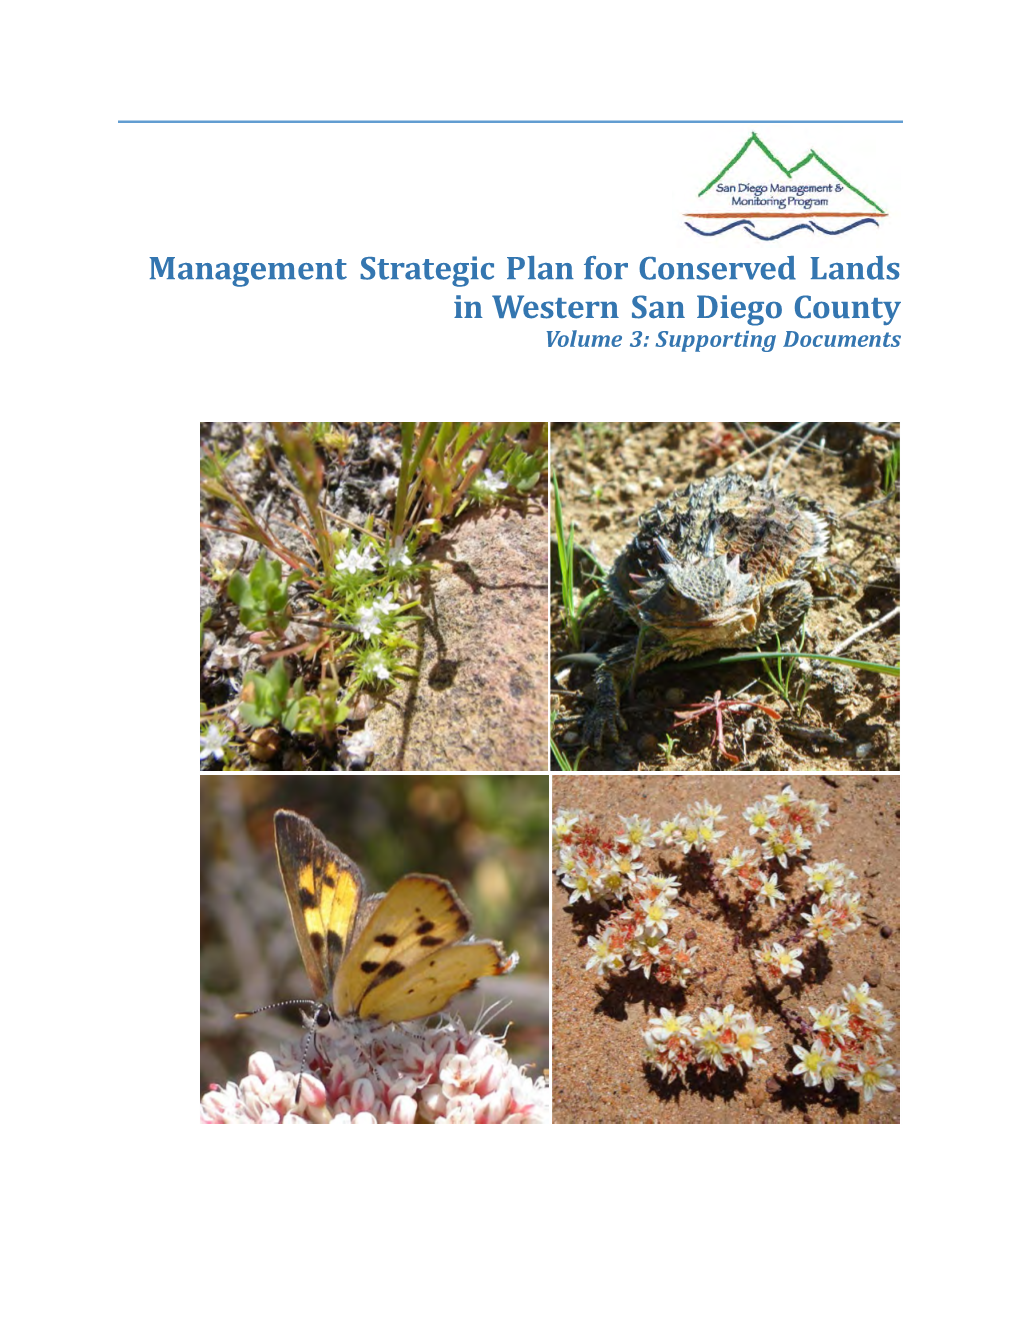 Management Strategic Plan for Conserved Lands in Western San Diego County Volume 3: Supporting Documents